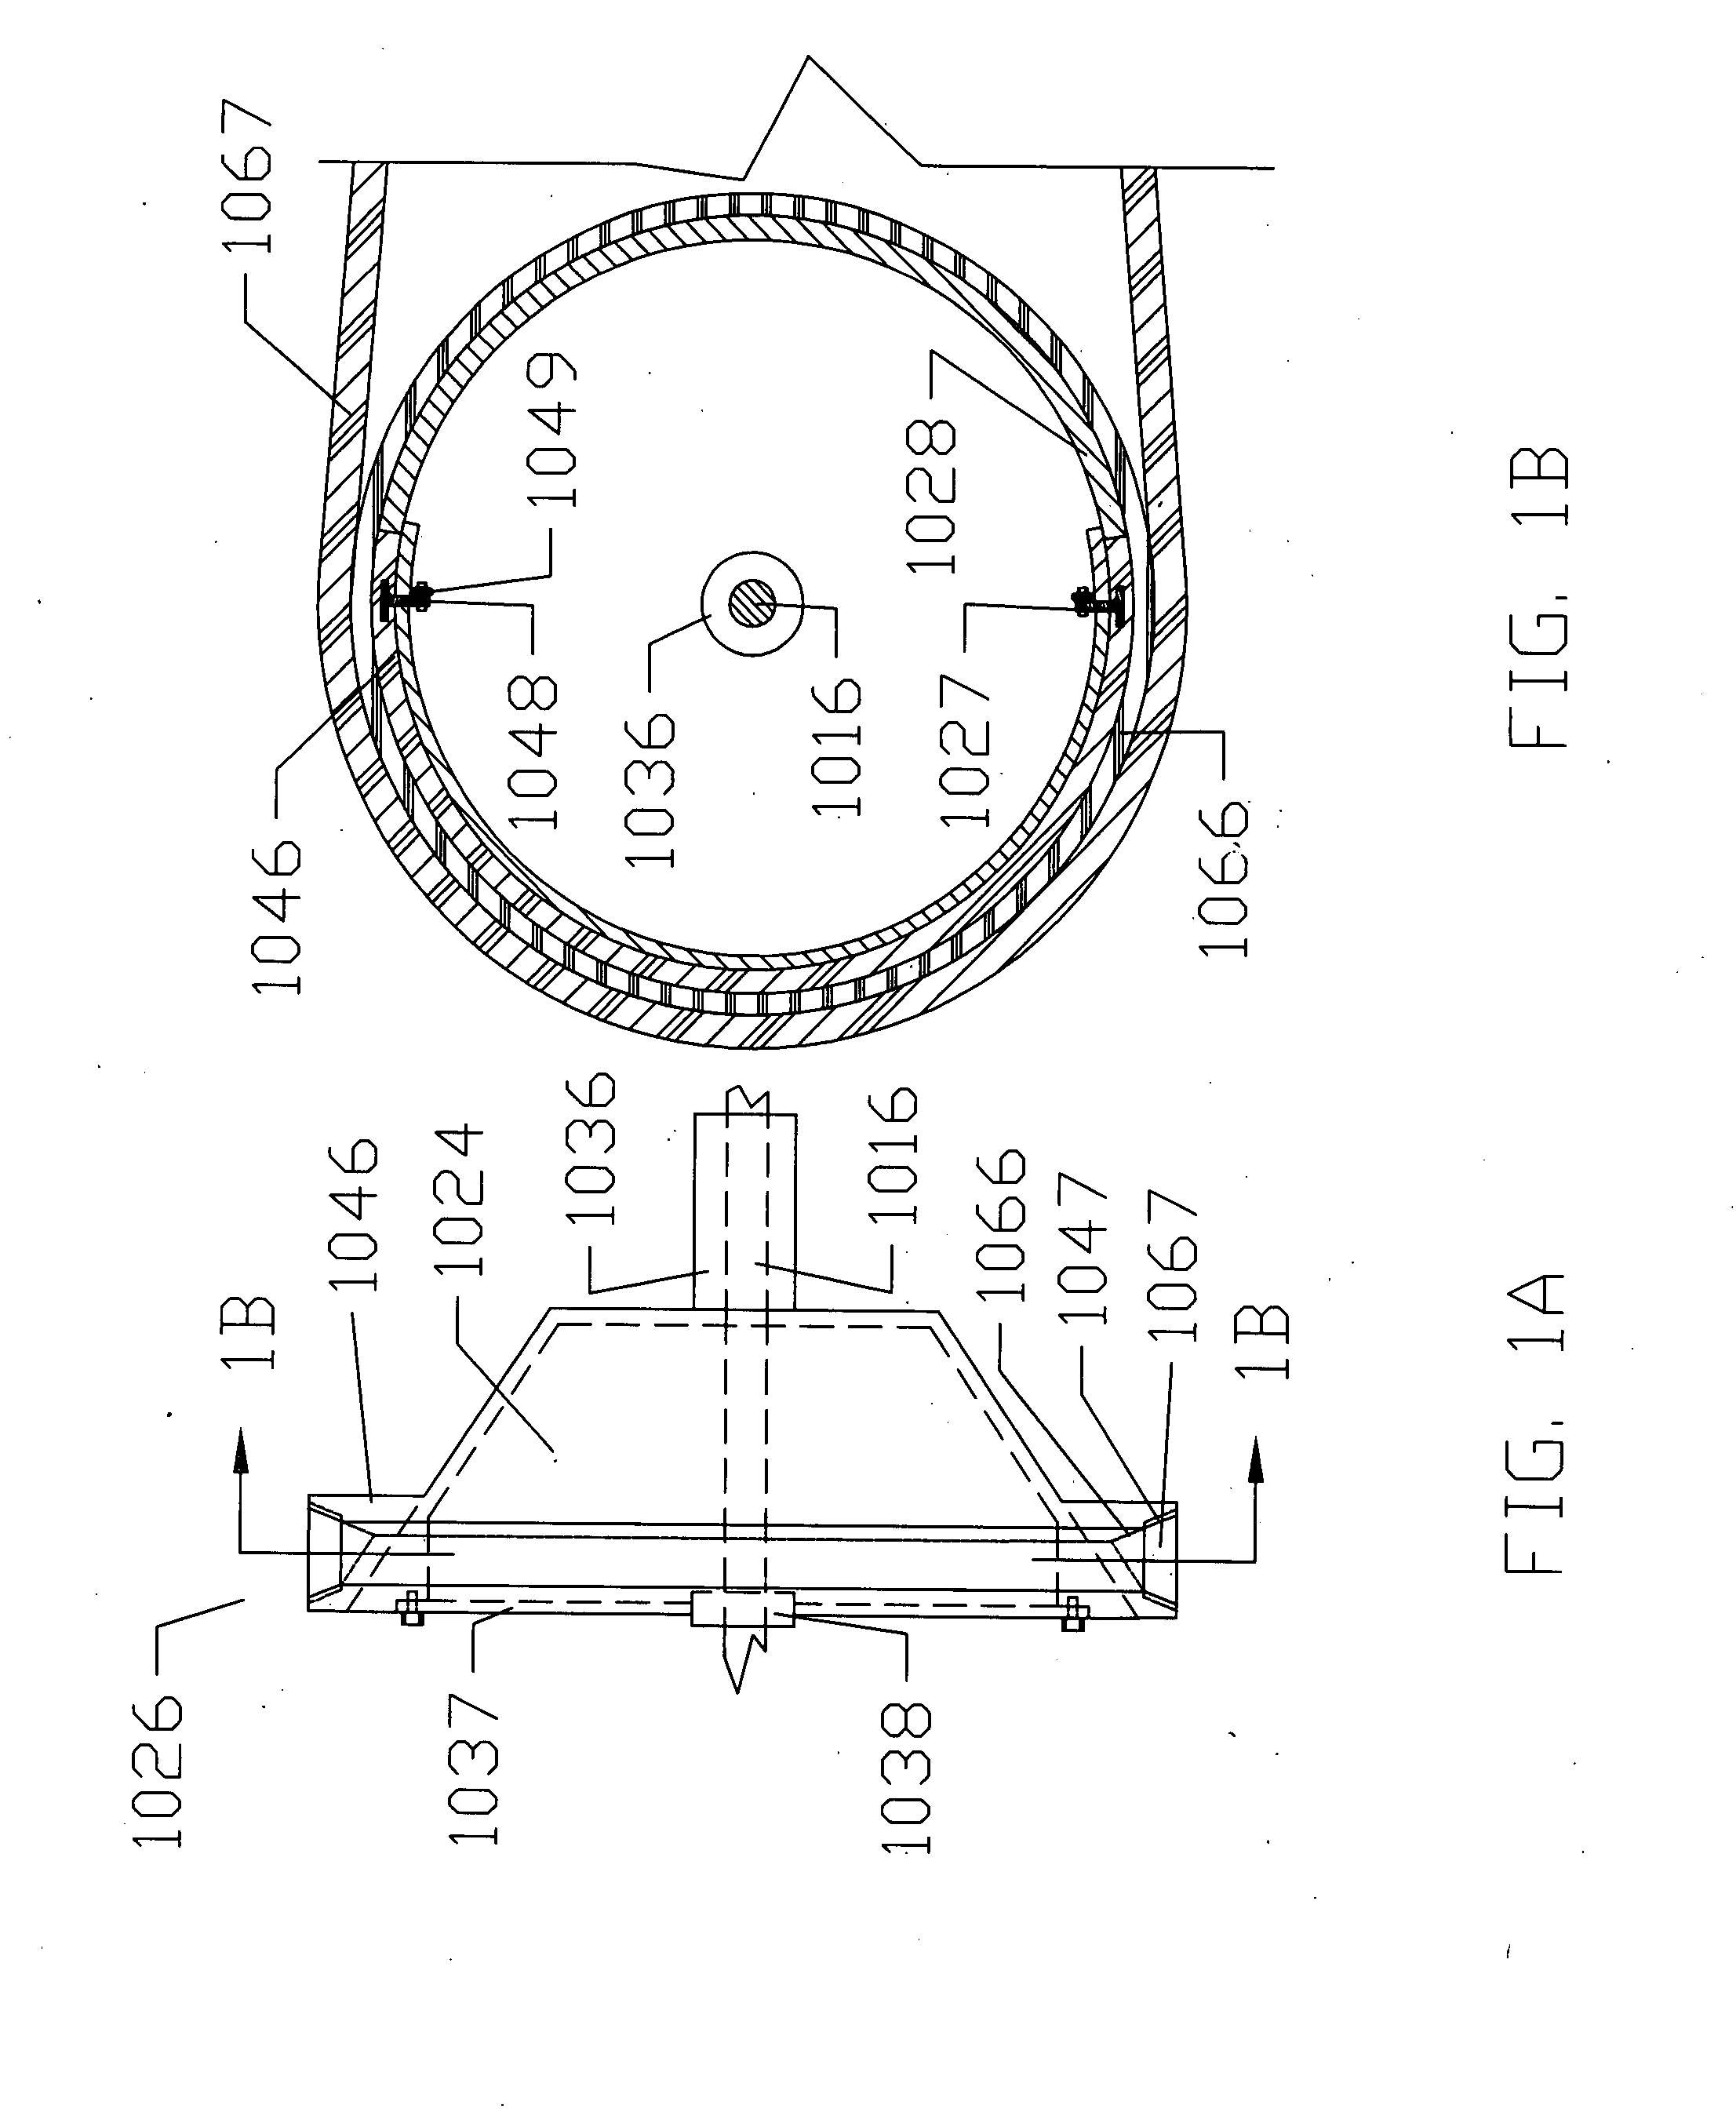 Cones, configurations, and adjusters for friction and non-friction dependent continuous variable transmissions